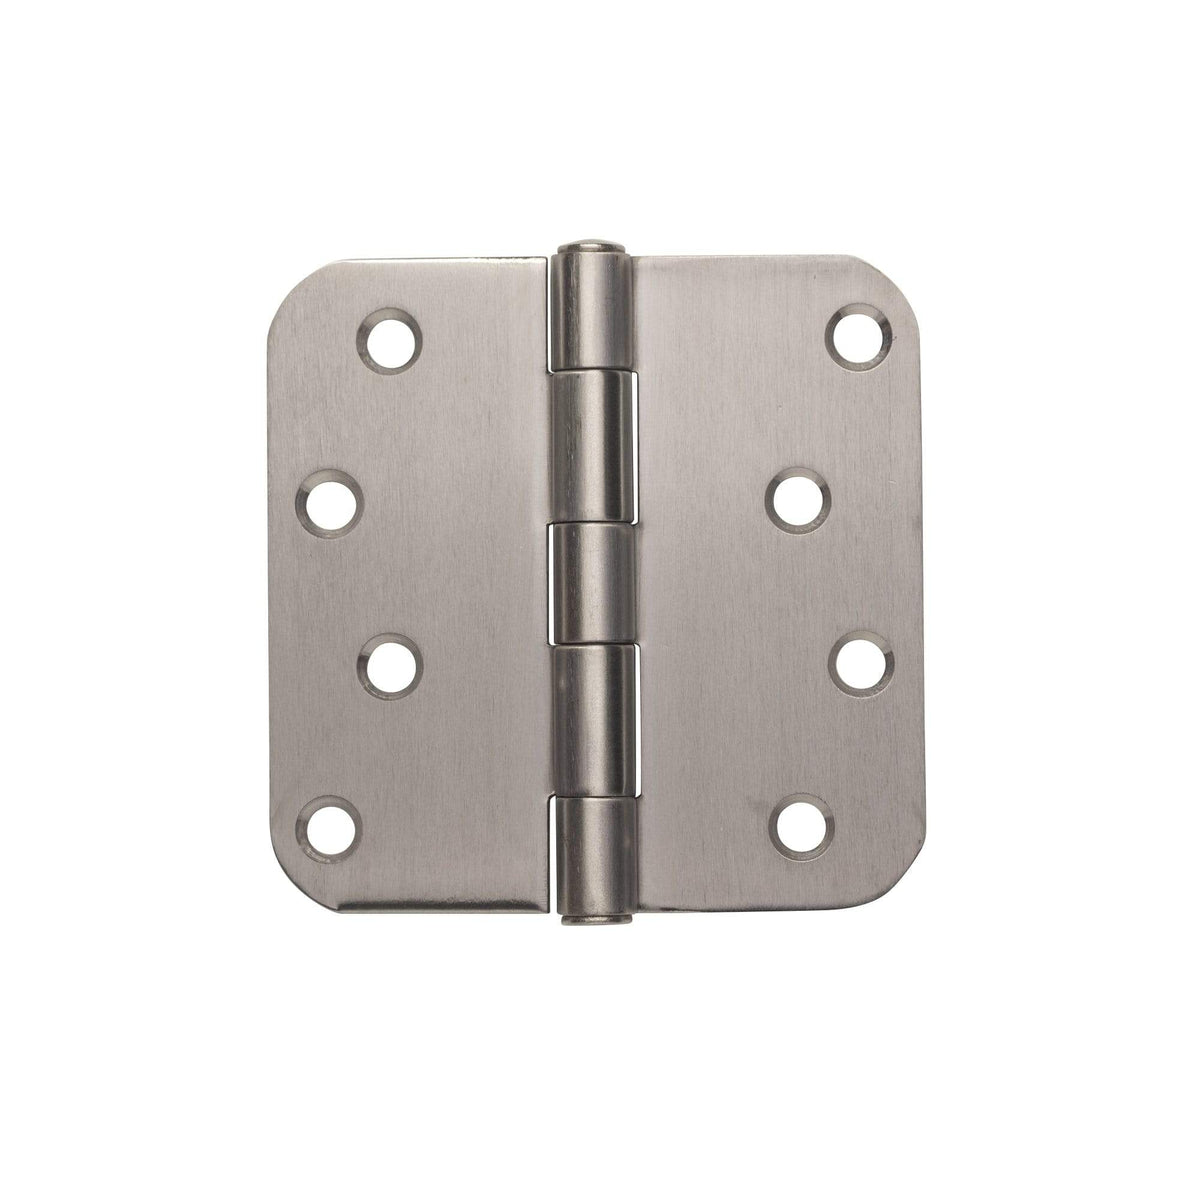 Stainless Steel Hinges Residential Hinges - 4" X 4" Plain Bearing With 5/8" Radius Corners - Sold In Pairs